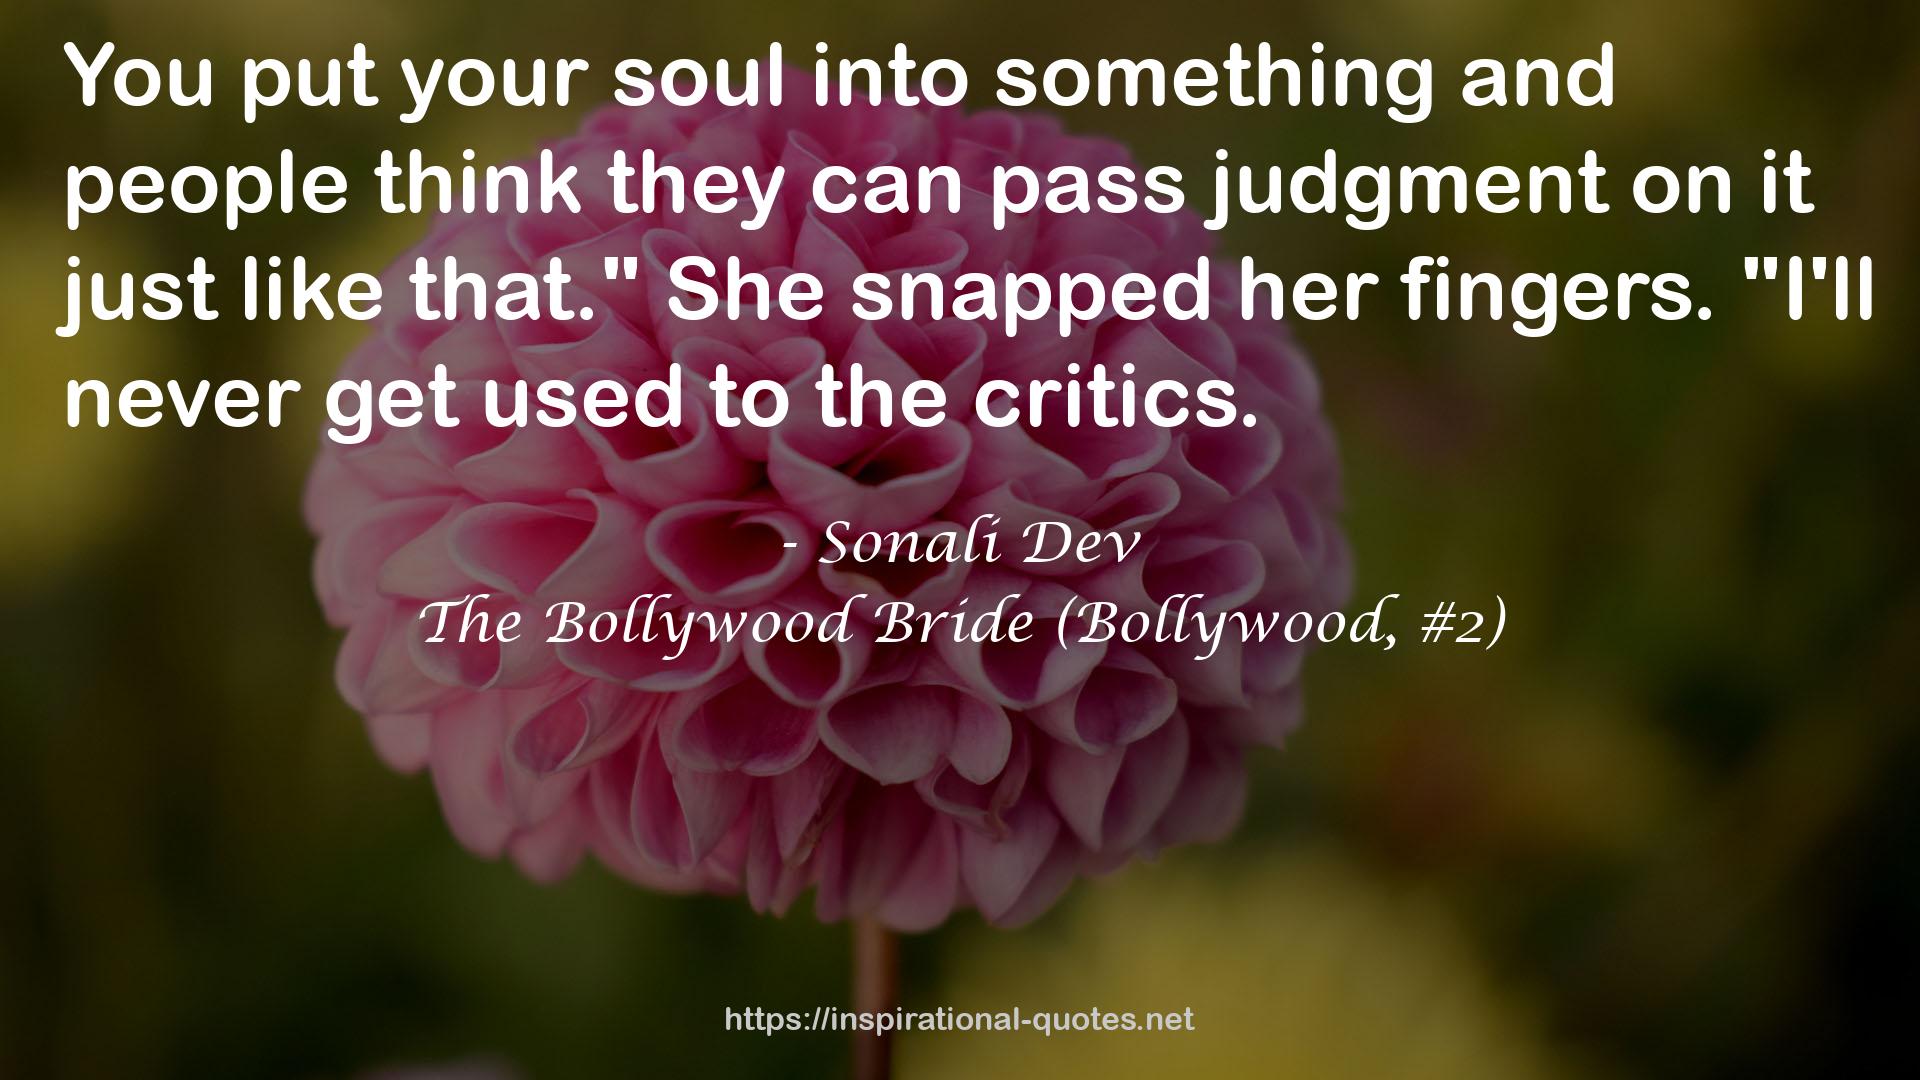 The Bollywood Bride (Bollywood, #2) QUOTES